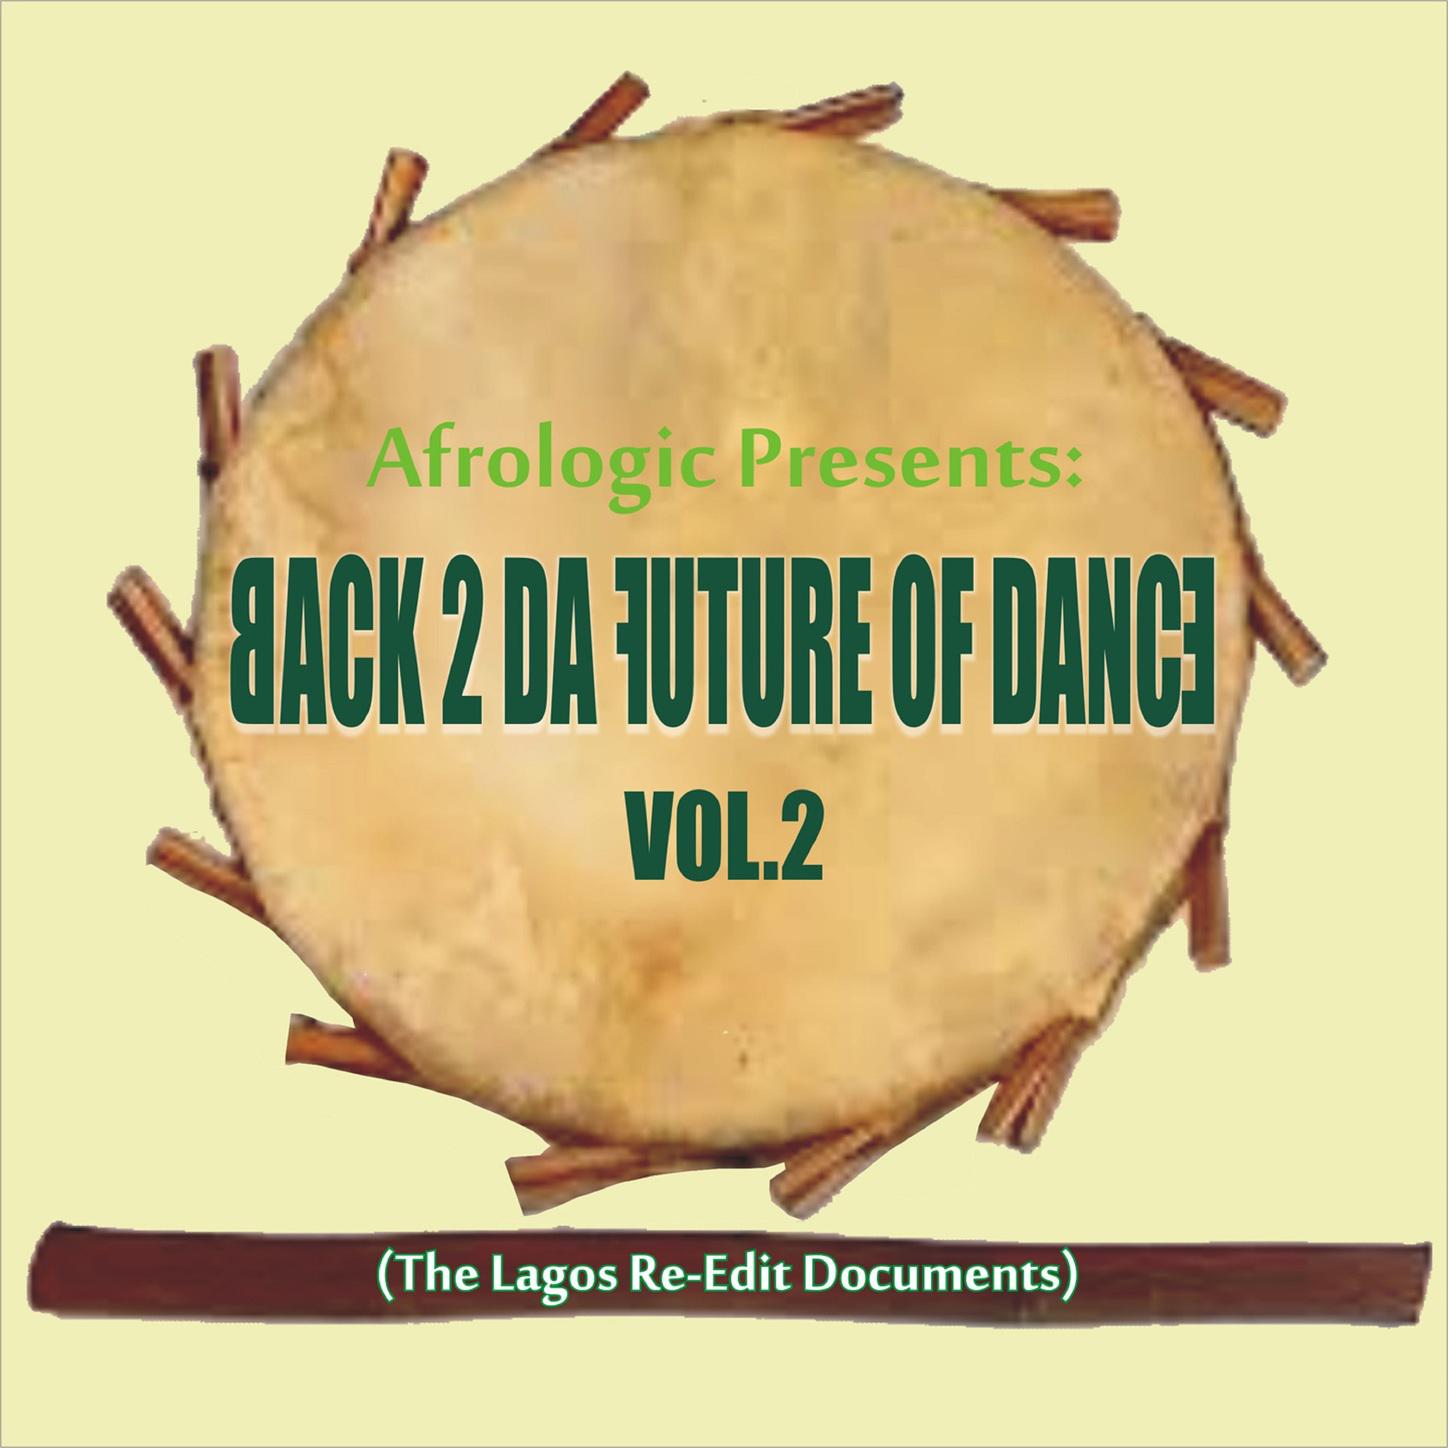 Back To The Future of Dance Vol, 2 (The Lagos Re-Edit Documents)